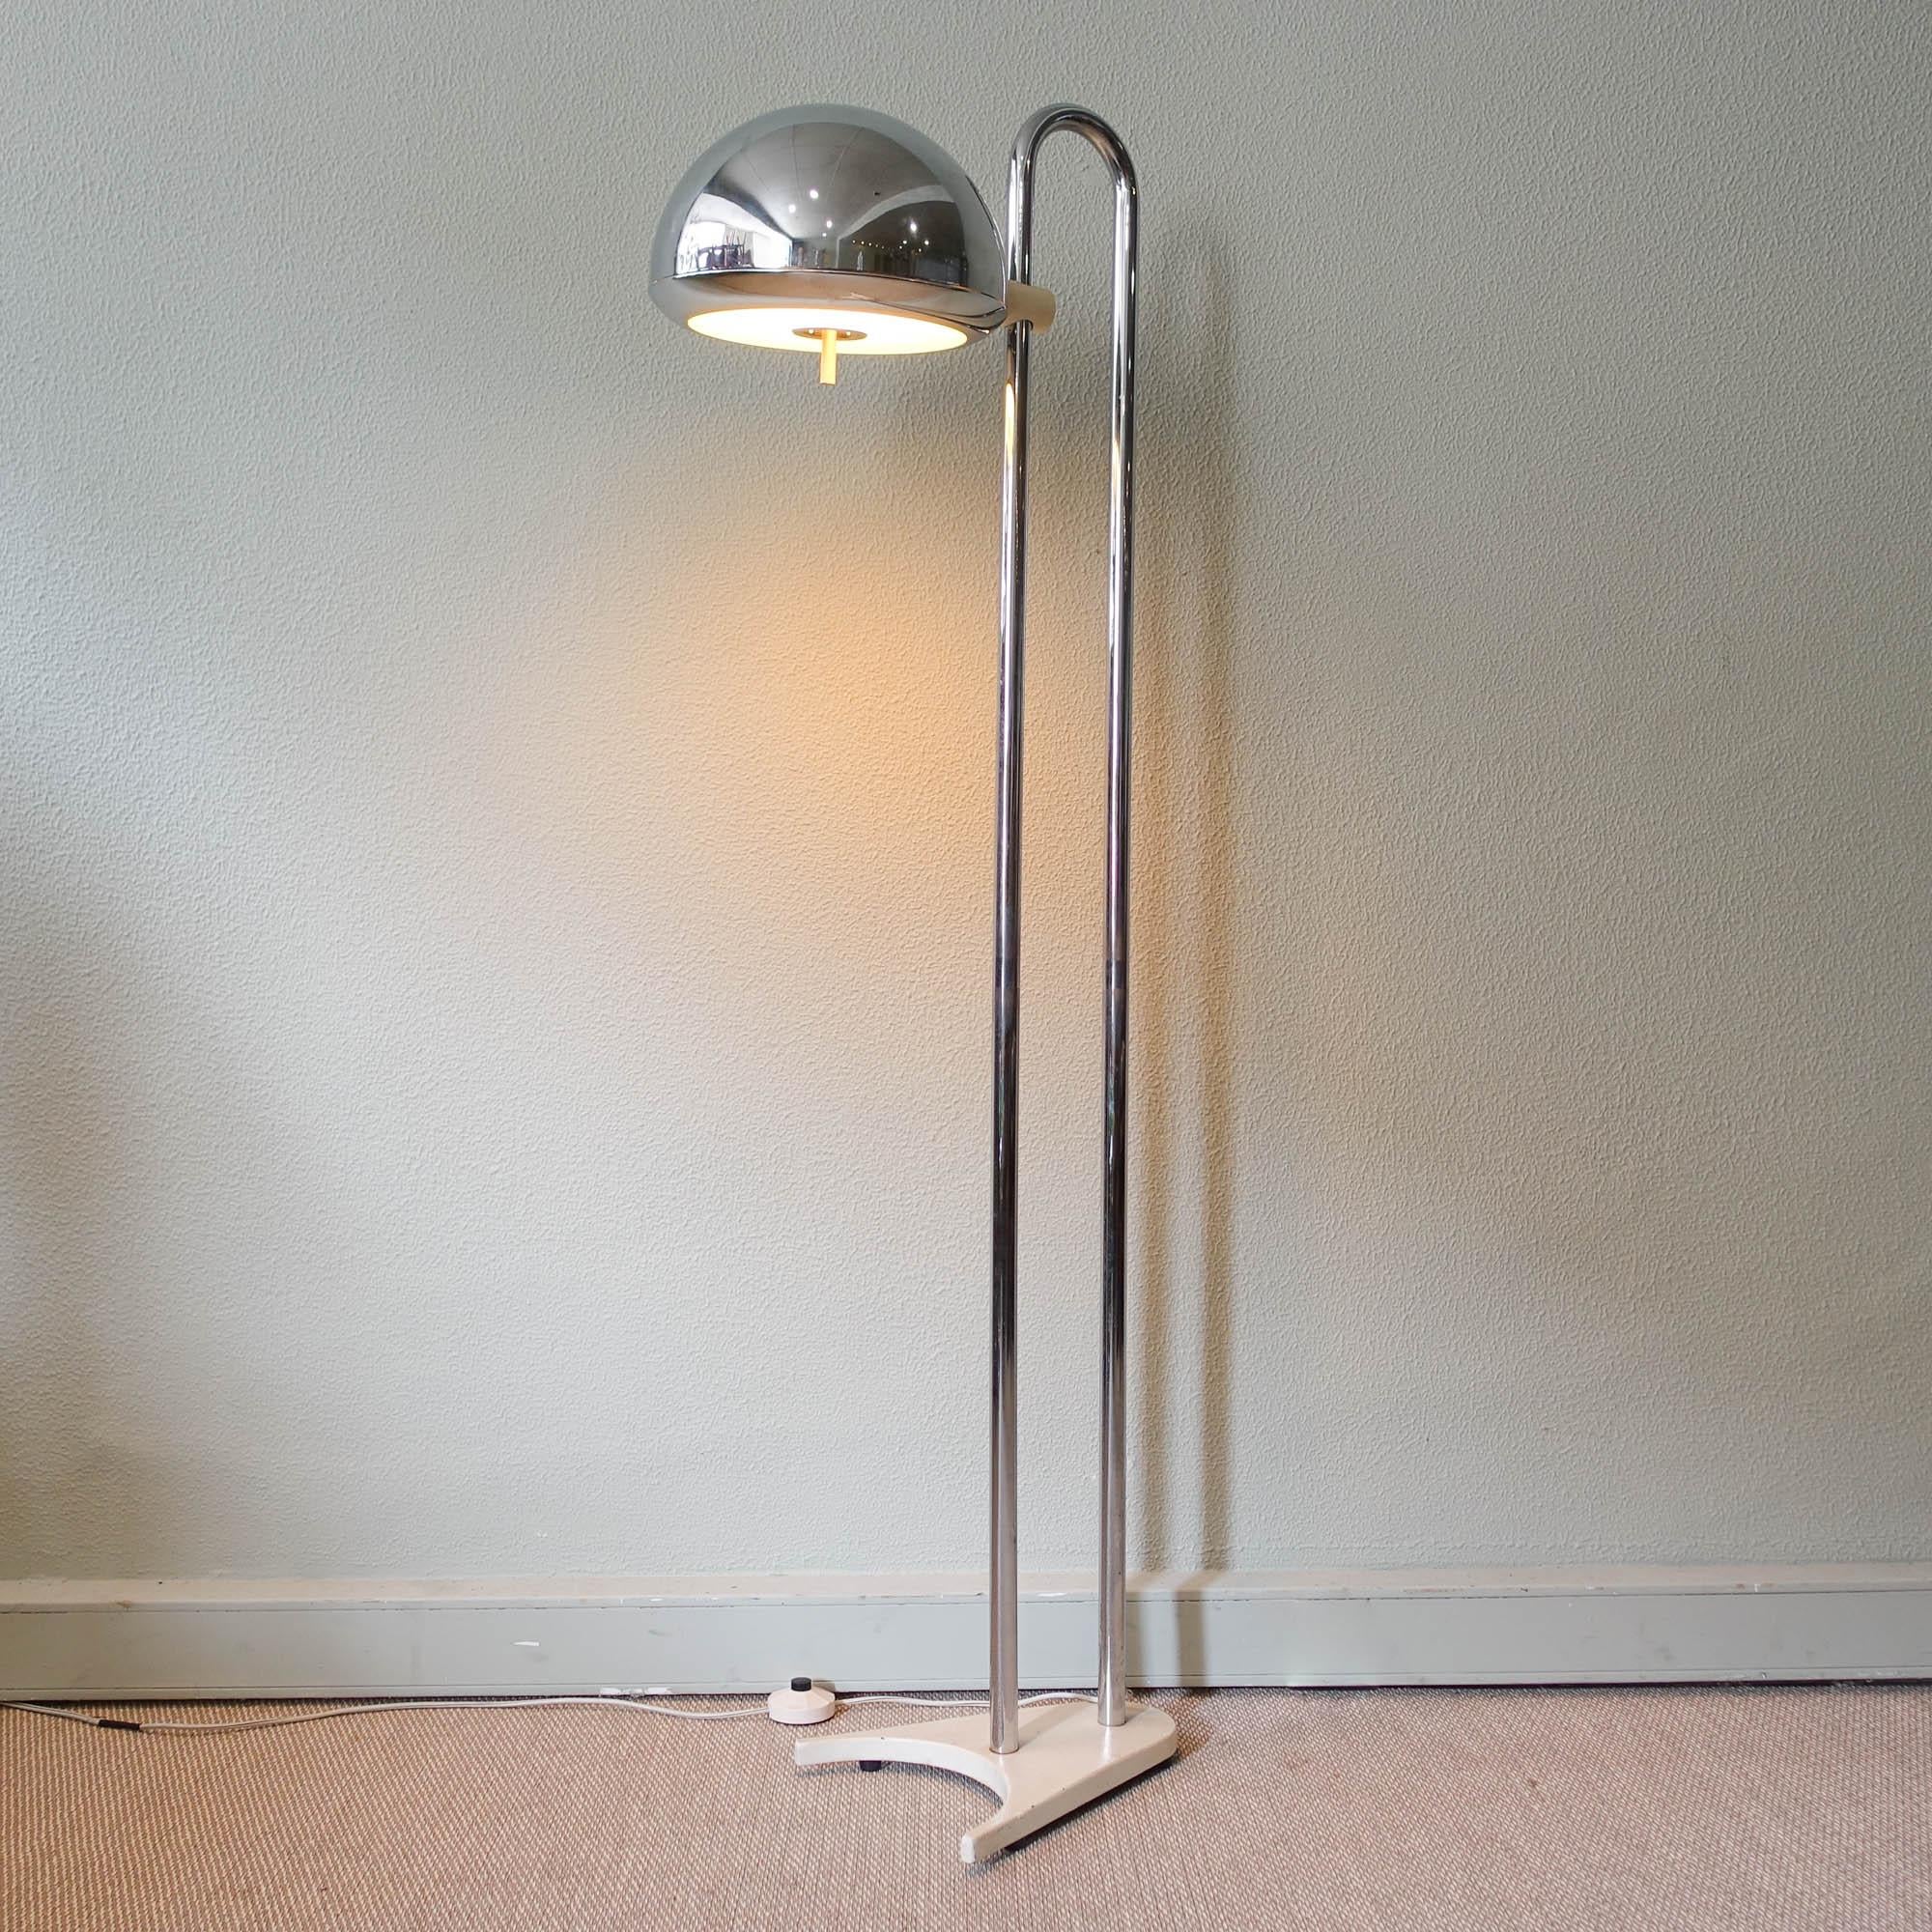 Step into the enchanting world of 1970s Spanish design with this exceptional floor lamp, crafted by Luis Perez de La Oliva and produced by Grin Luz. A rare find, it features a sleek white metal base supporting a gracefully bent chrome tube. The